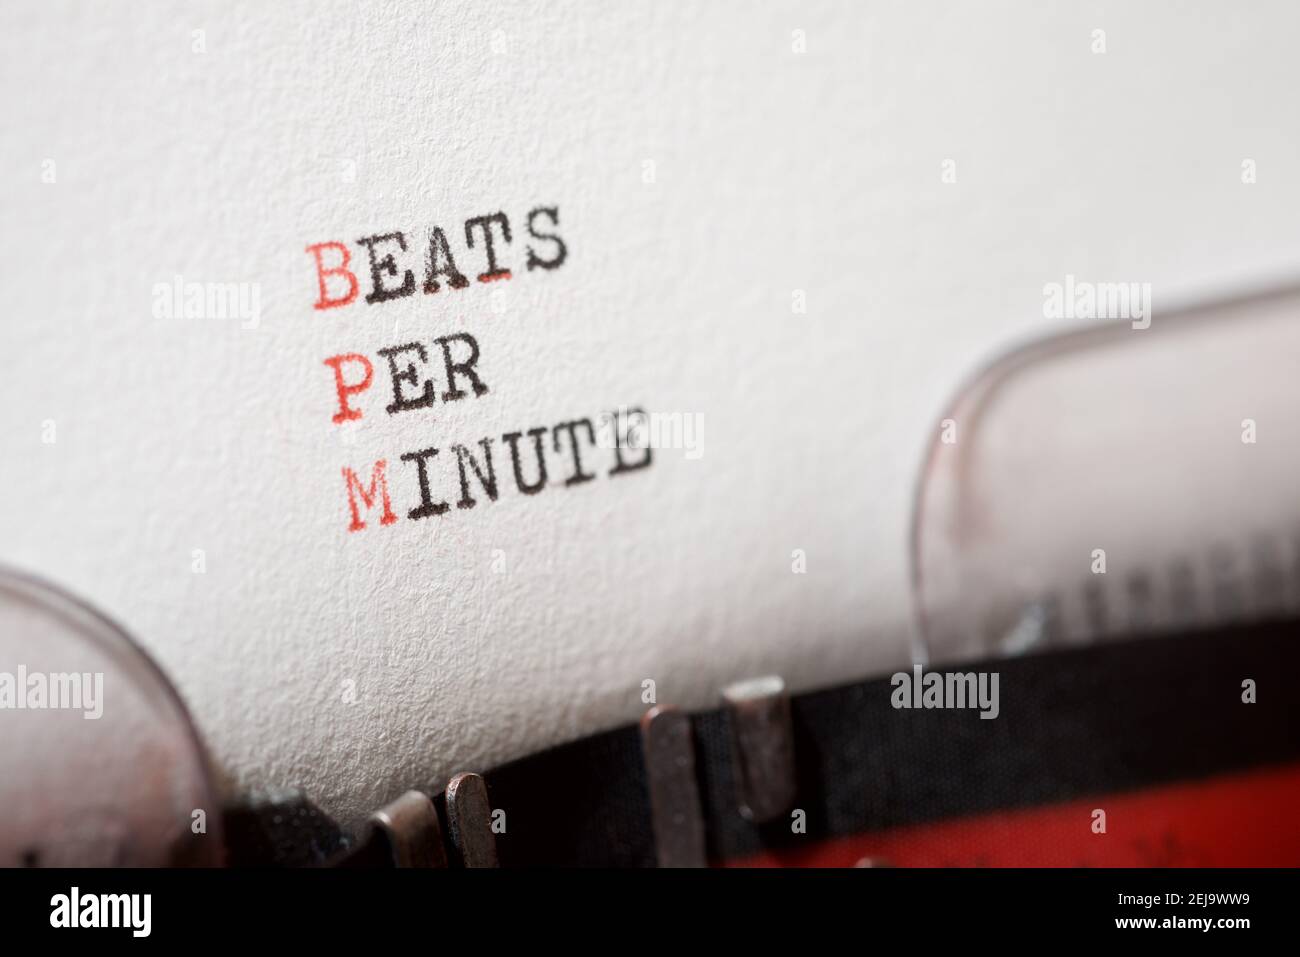 Beats per minute phrase written with a typewriter. Stock Photo